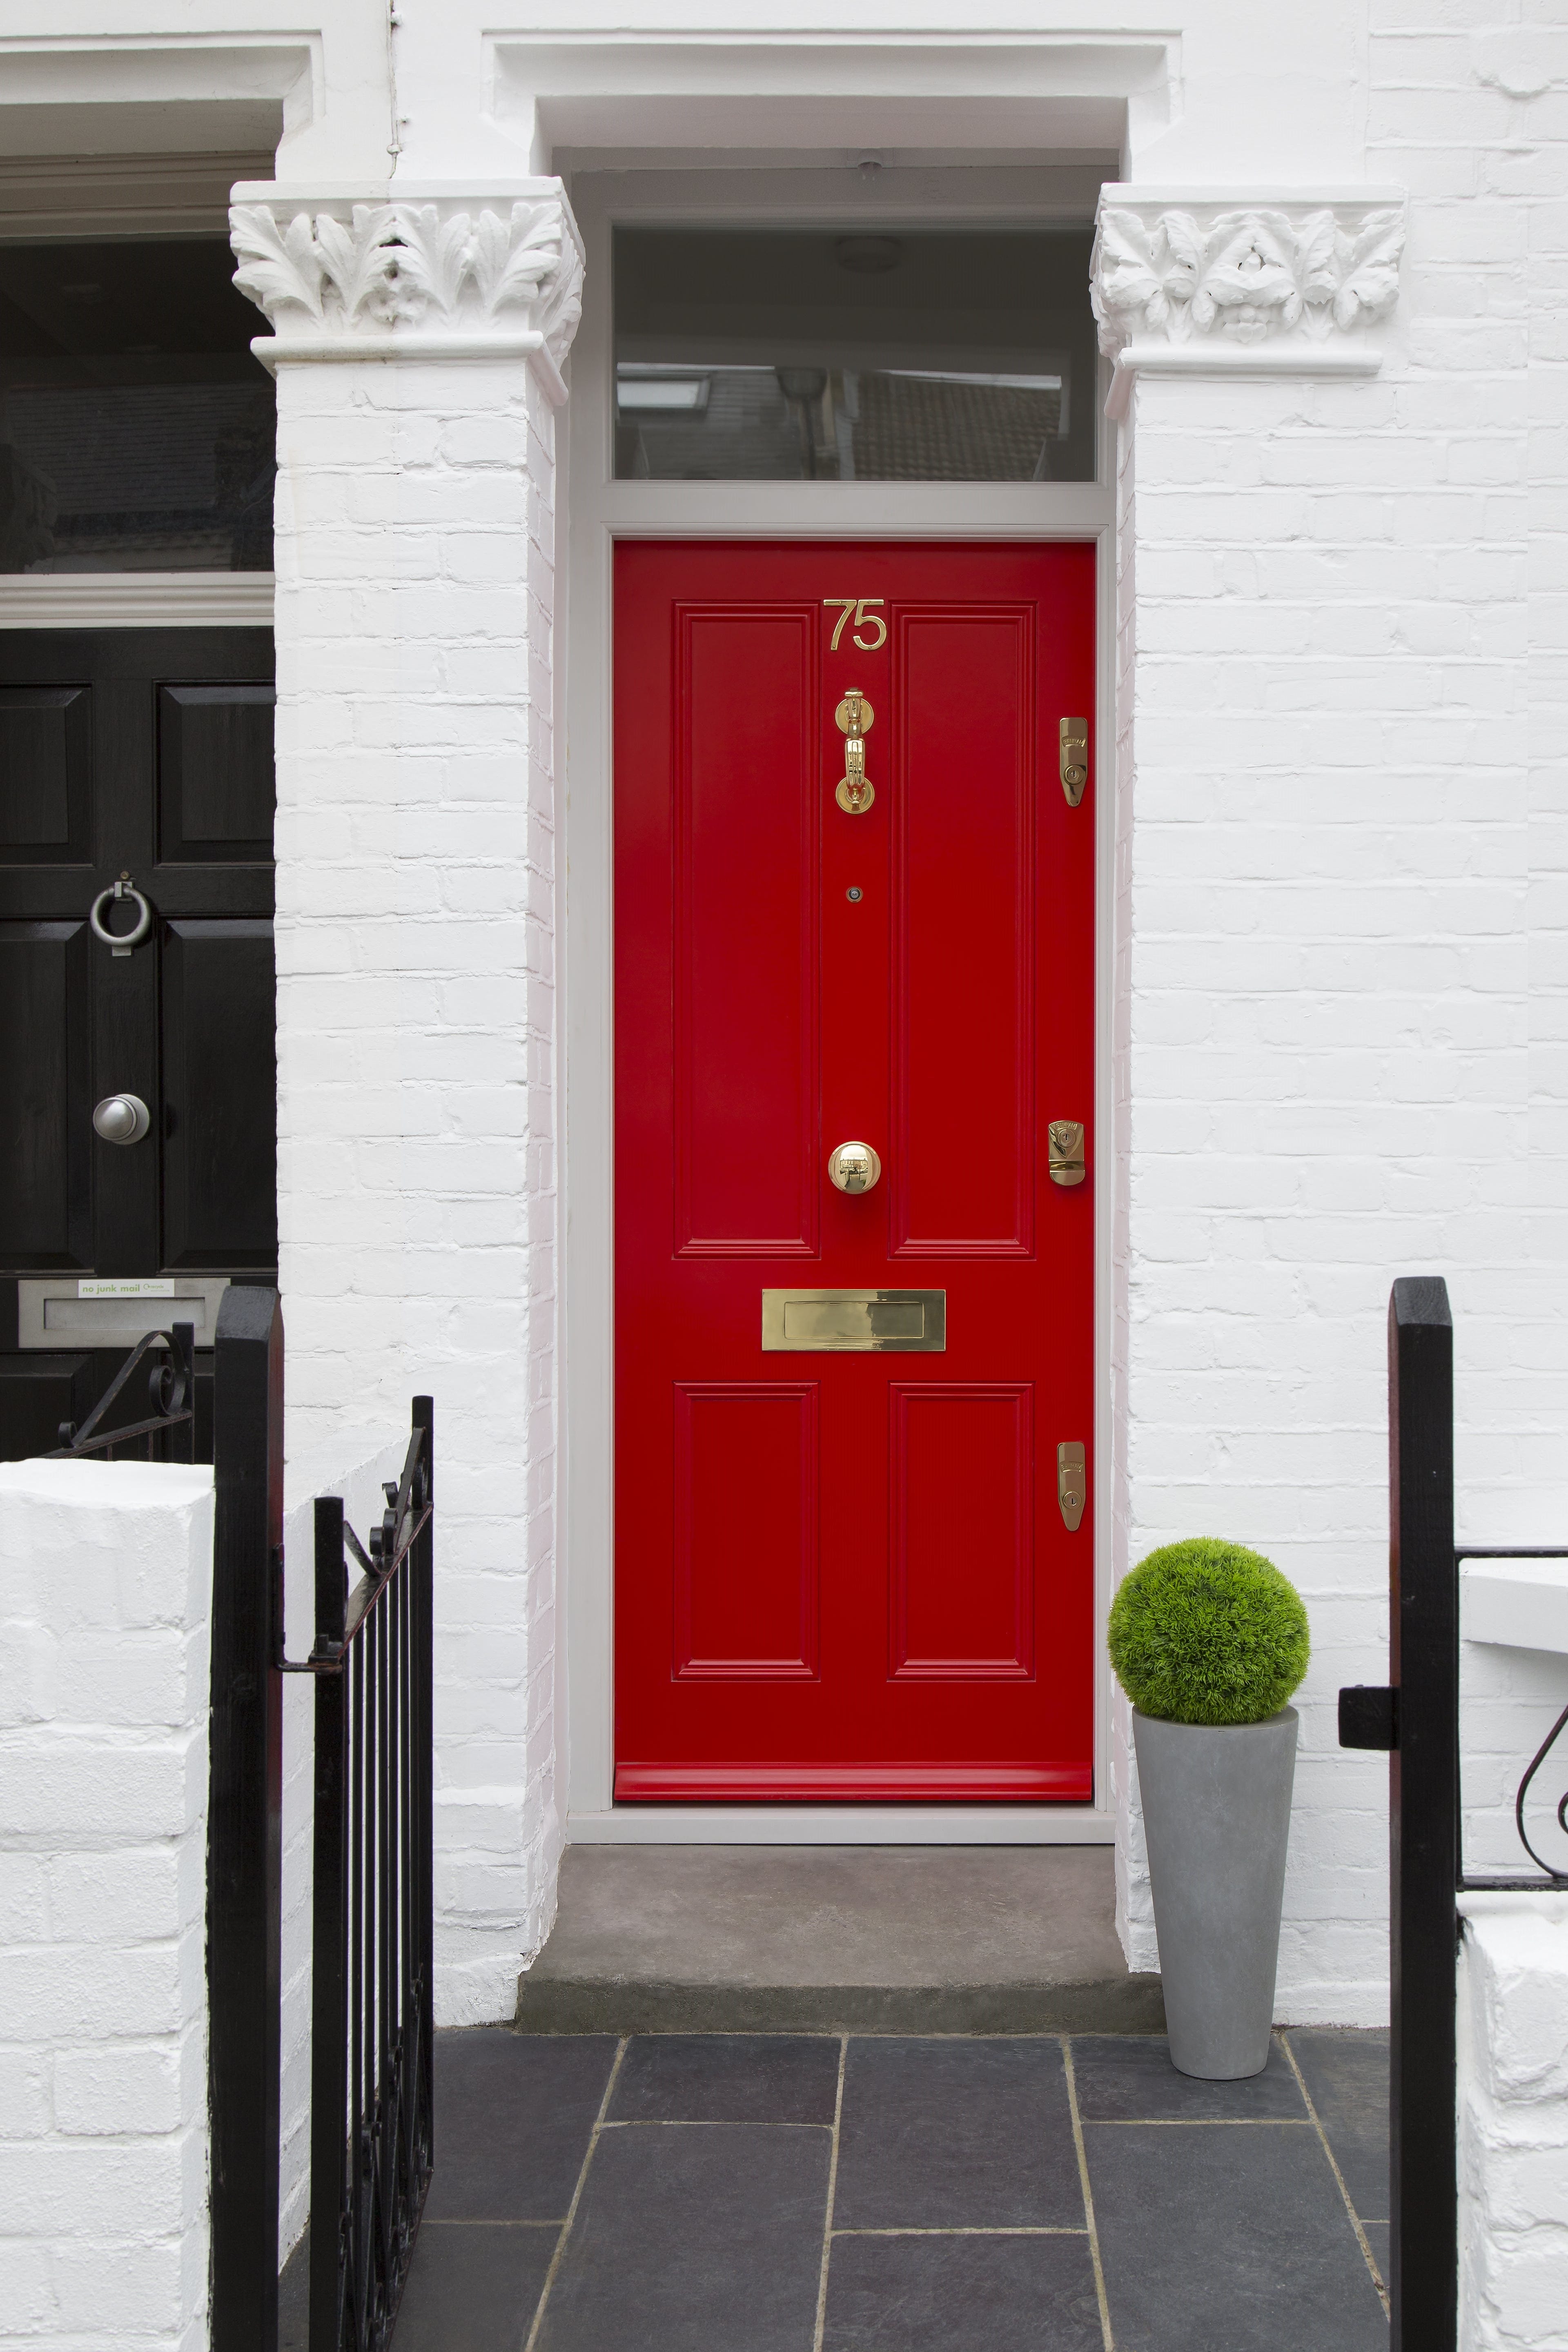 Front of House with Red Banham Door with Brass Door Locks, Letter Plate, Door Knob, Doctor's Door Knocker, Eye View and Black Railings, as well as Black Banham Door with Chrome Door Knocker, Door Knob and Letter Plate